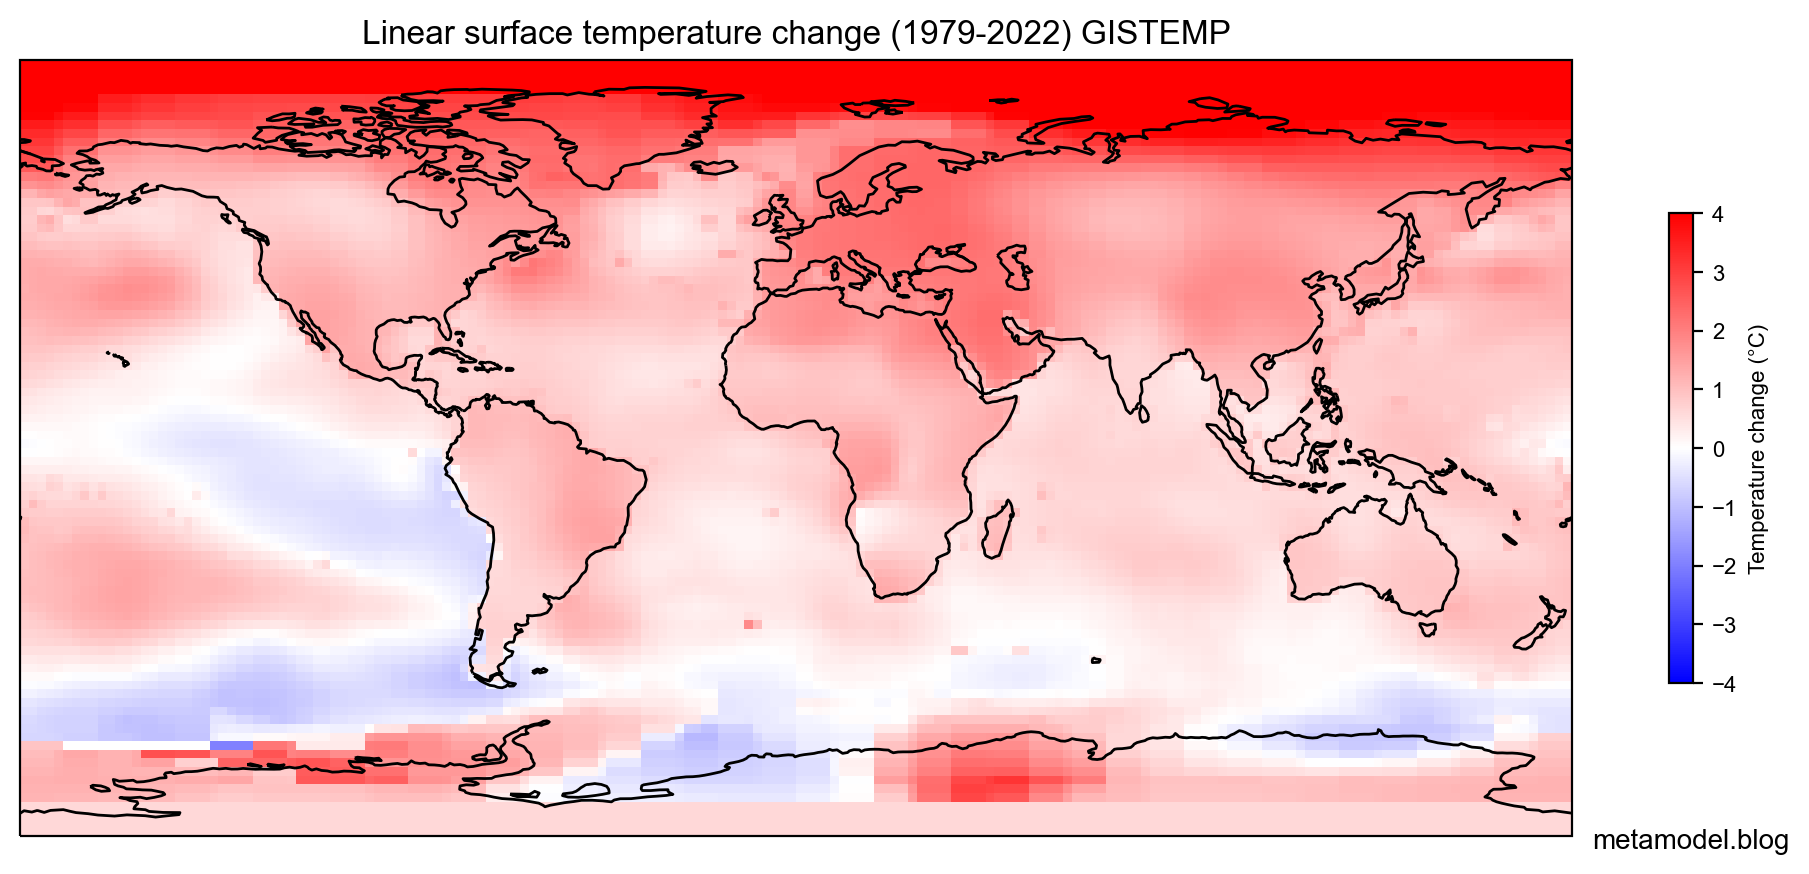 Linear surface temperature change between 1979 and 2022